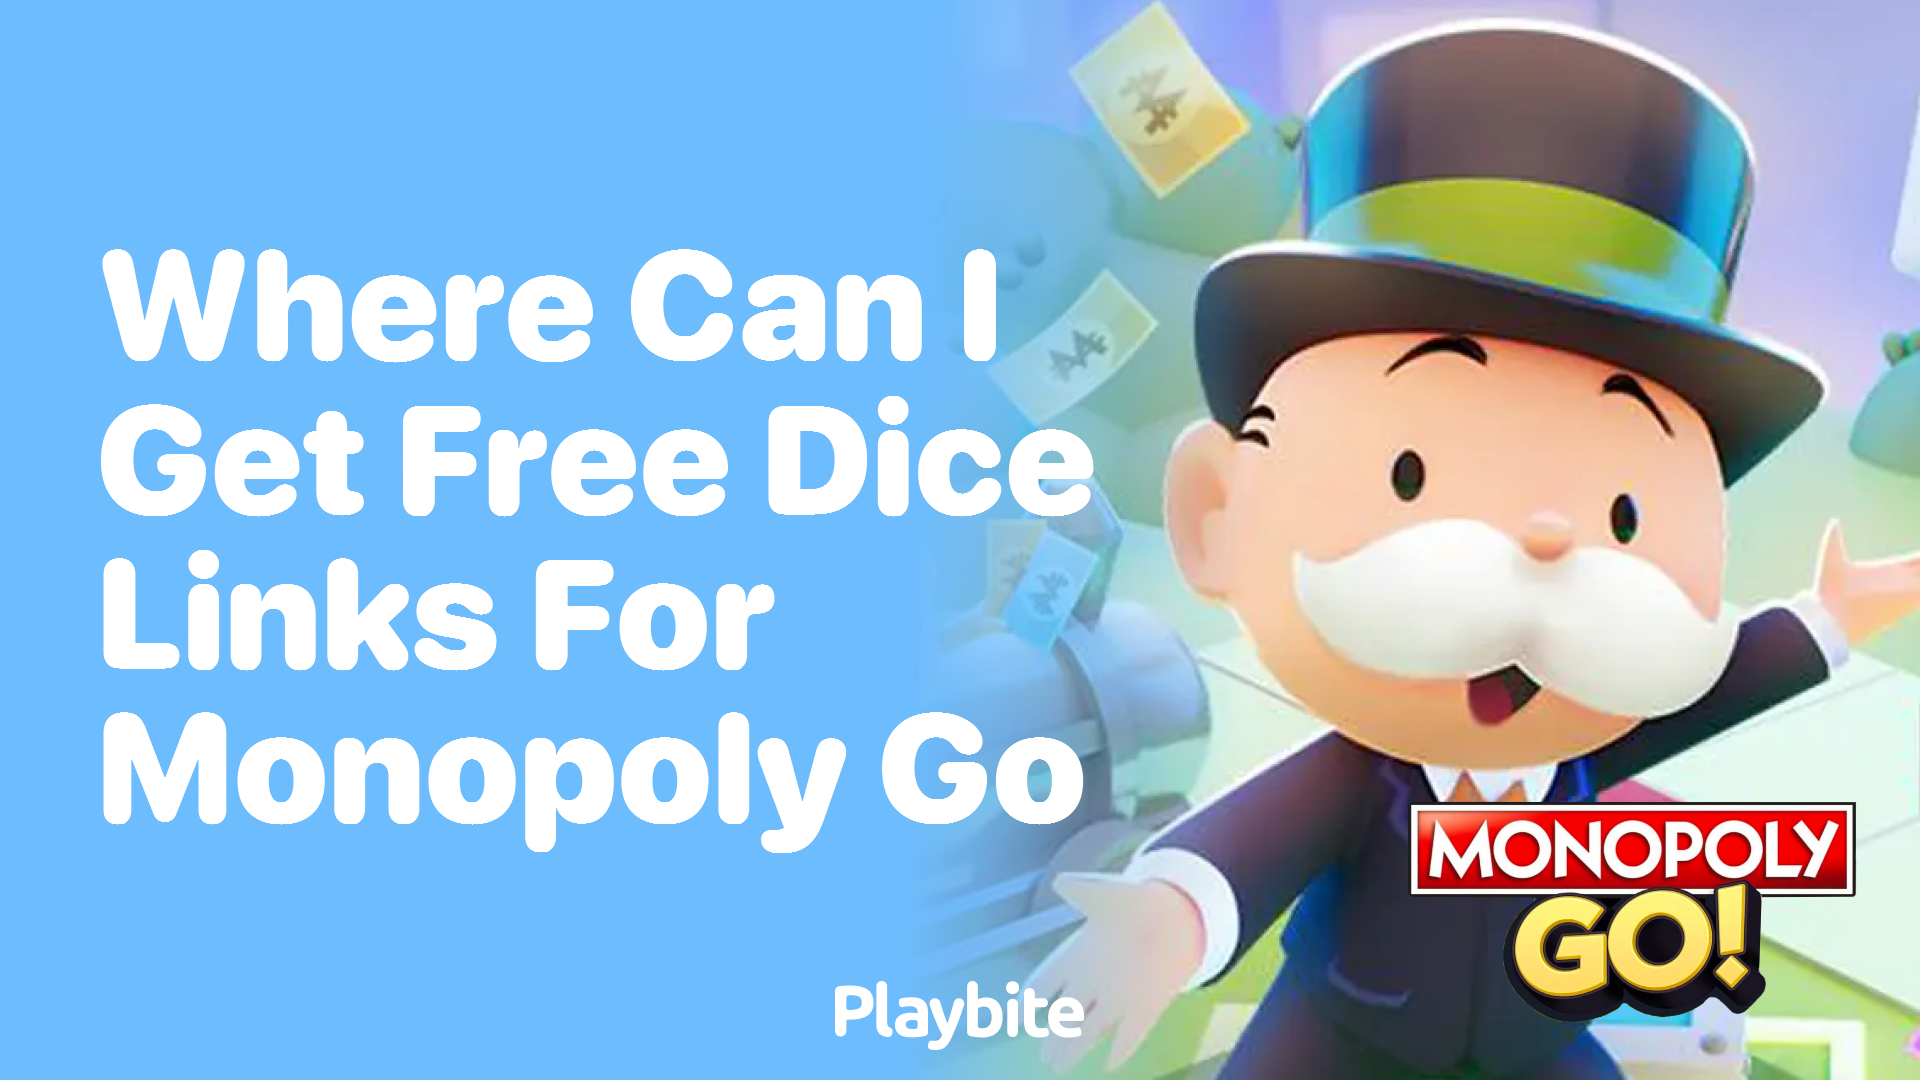 Where Can I Get Free Dice Links for Monopoly Go?